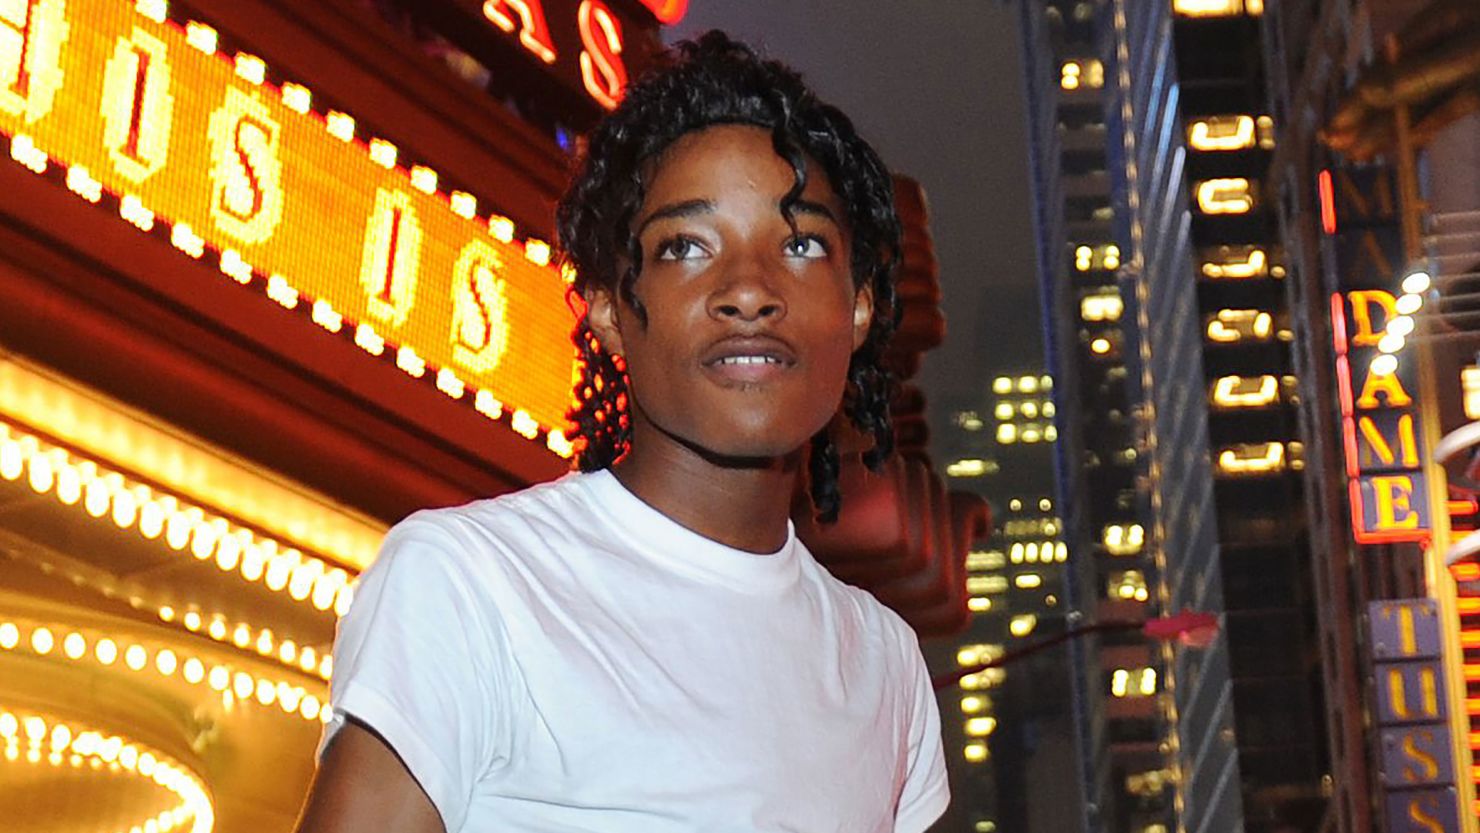 Jordan Neely stands in 2009 outside a Times Square cinema in New York.